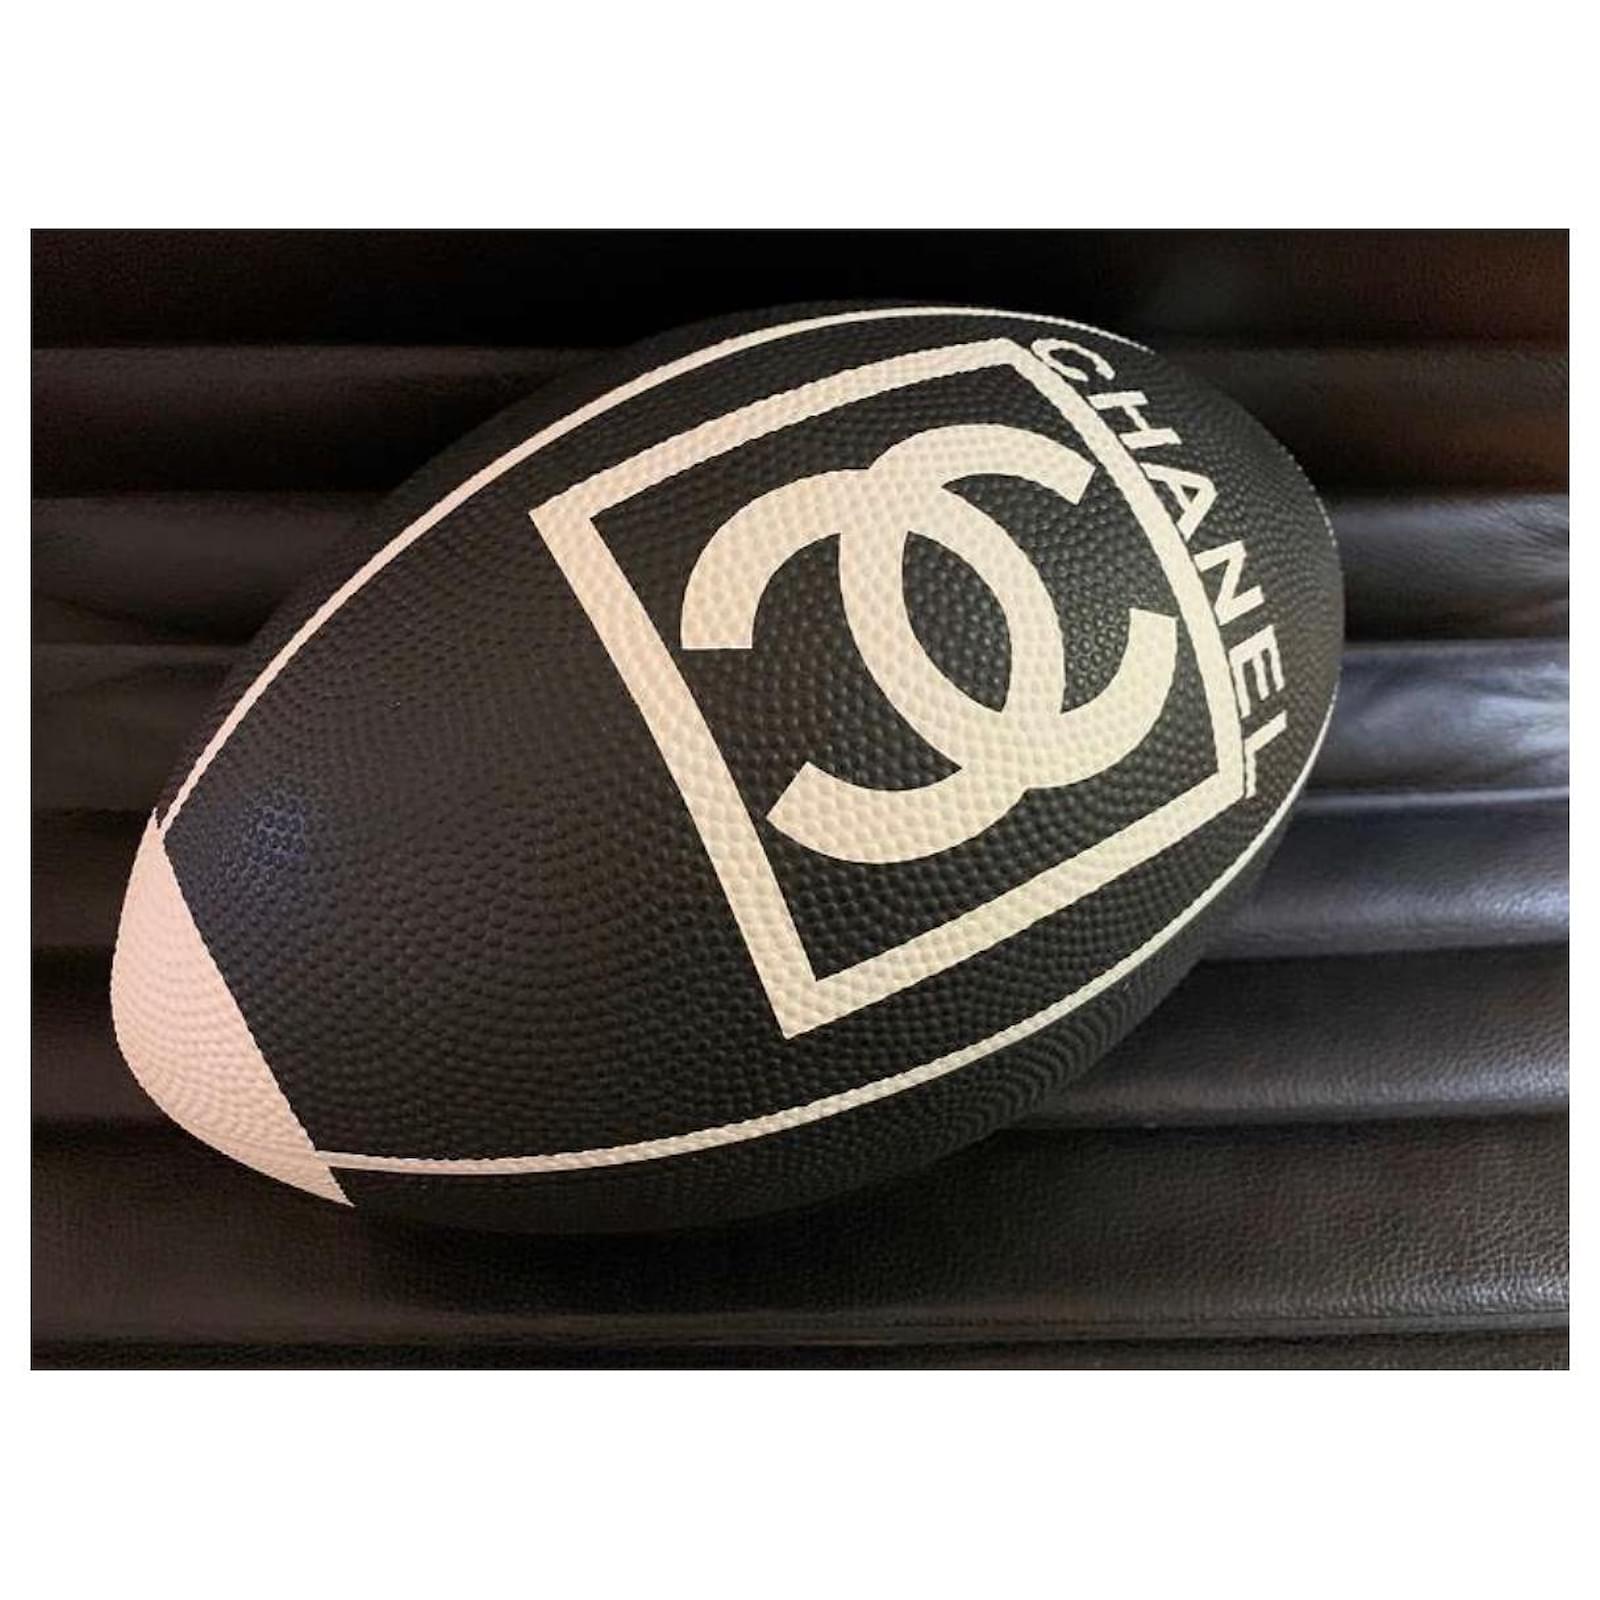 Extremely Rare Chanel Sport Ball / Rugby / American Football